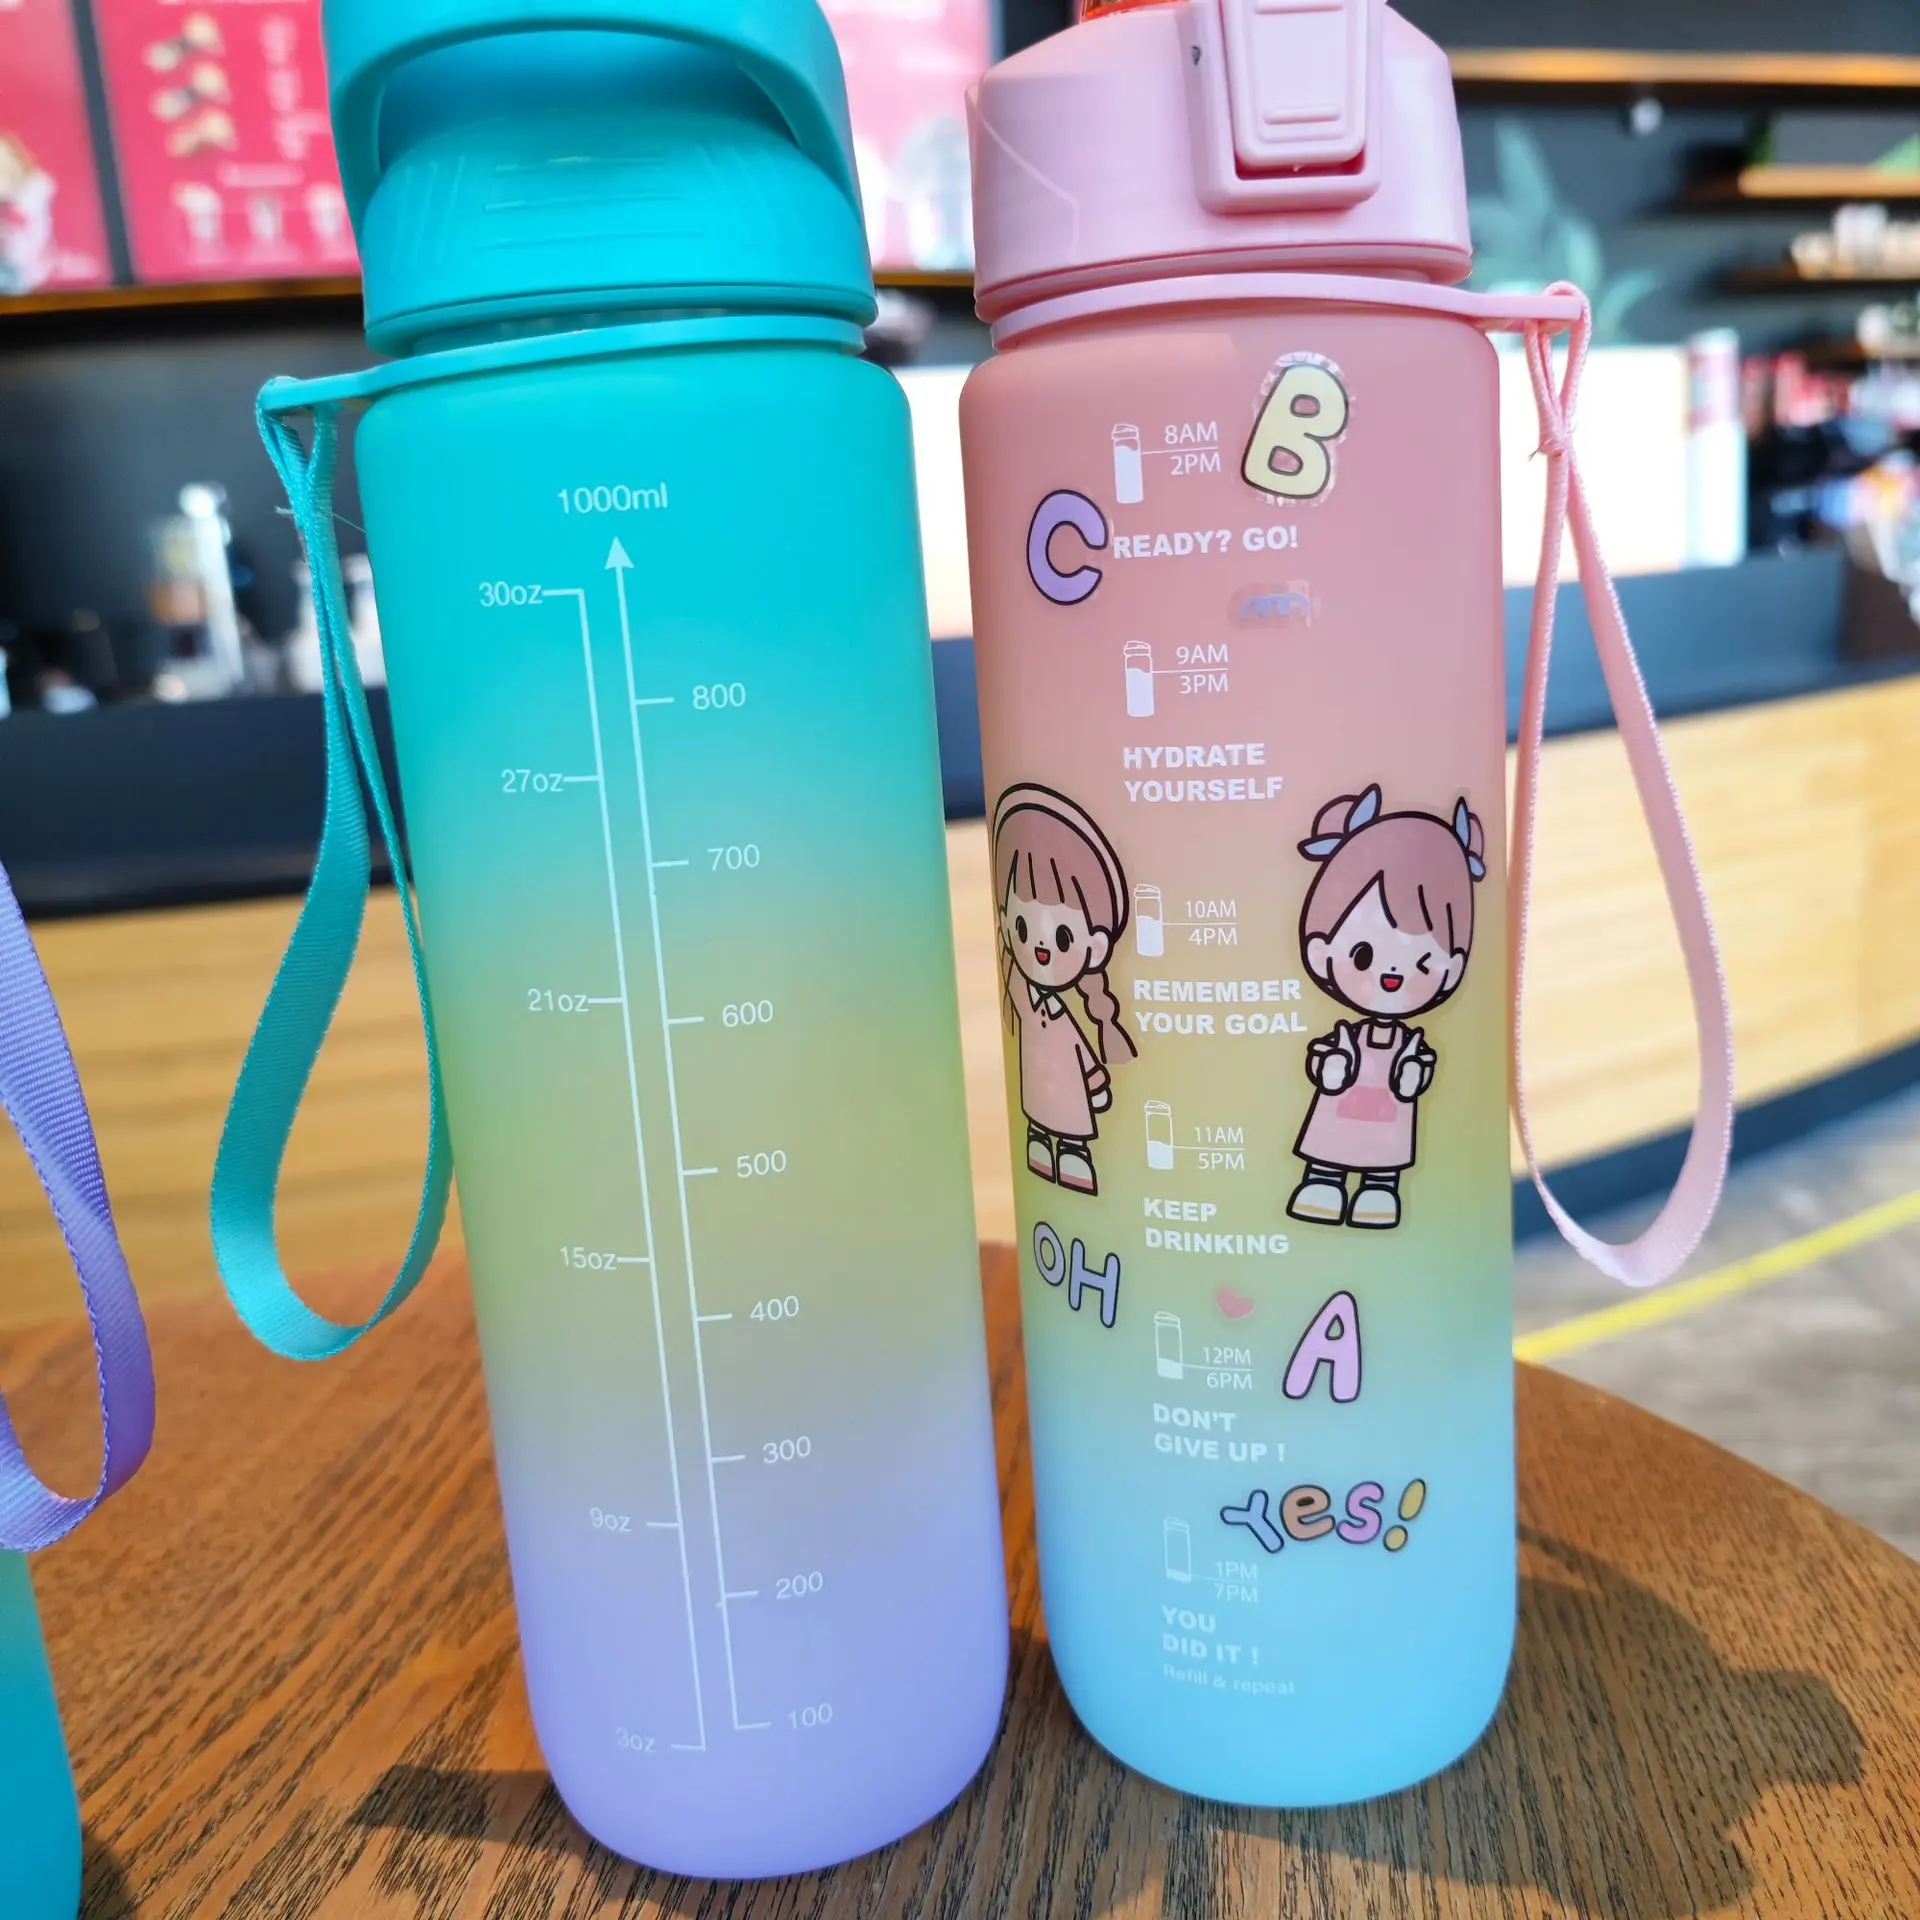 https://ae01.alicdn.com/kf/S85dfd203a7174a8694b51863d2640830X/1000ml-Portable-Large-Capacity-Water-Bottle-Time-Marker-Leak-Proof-BPA-Frosted-Cup-for-Outdoor-Sports.jpg